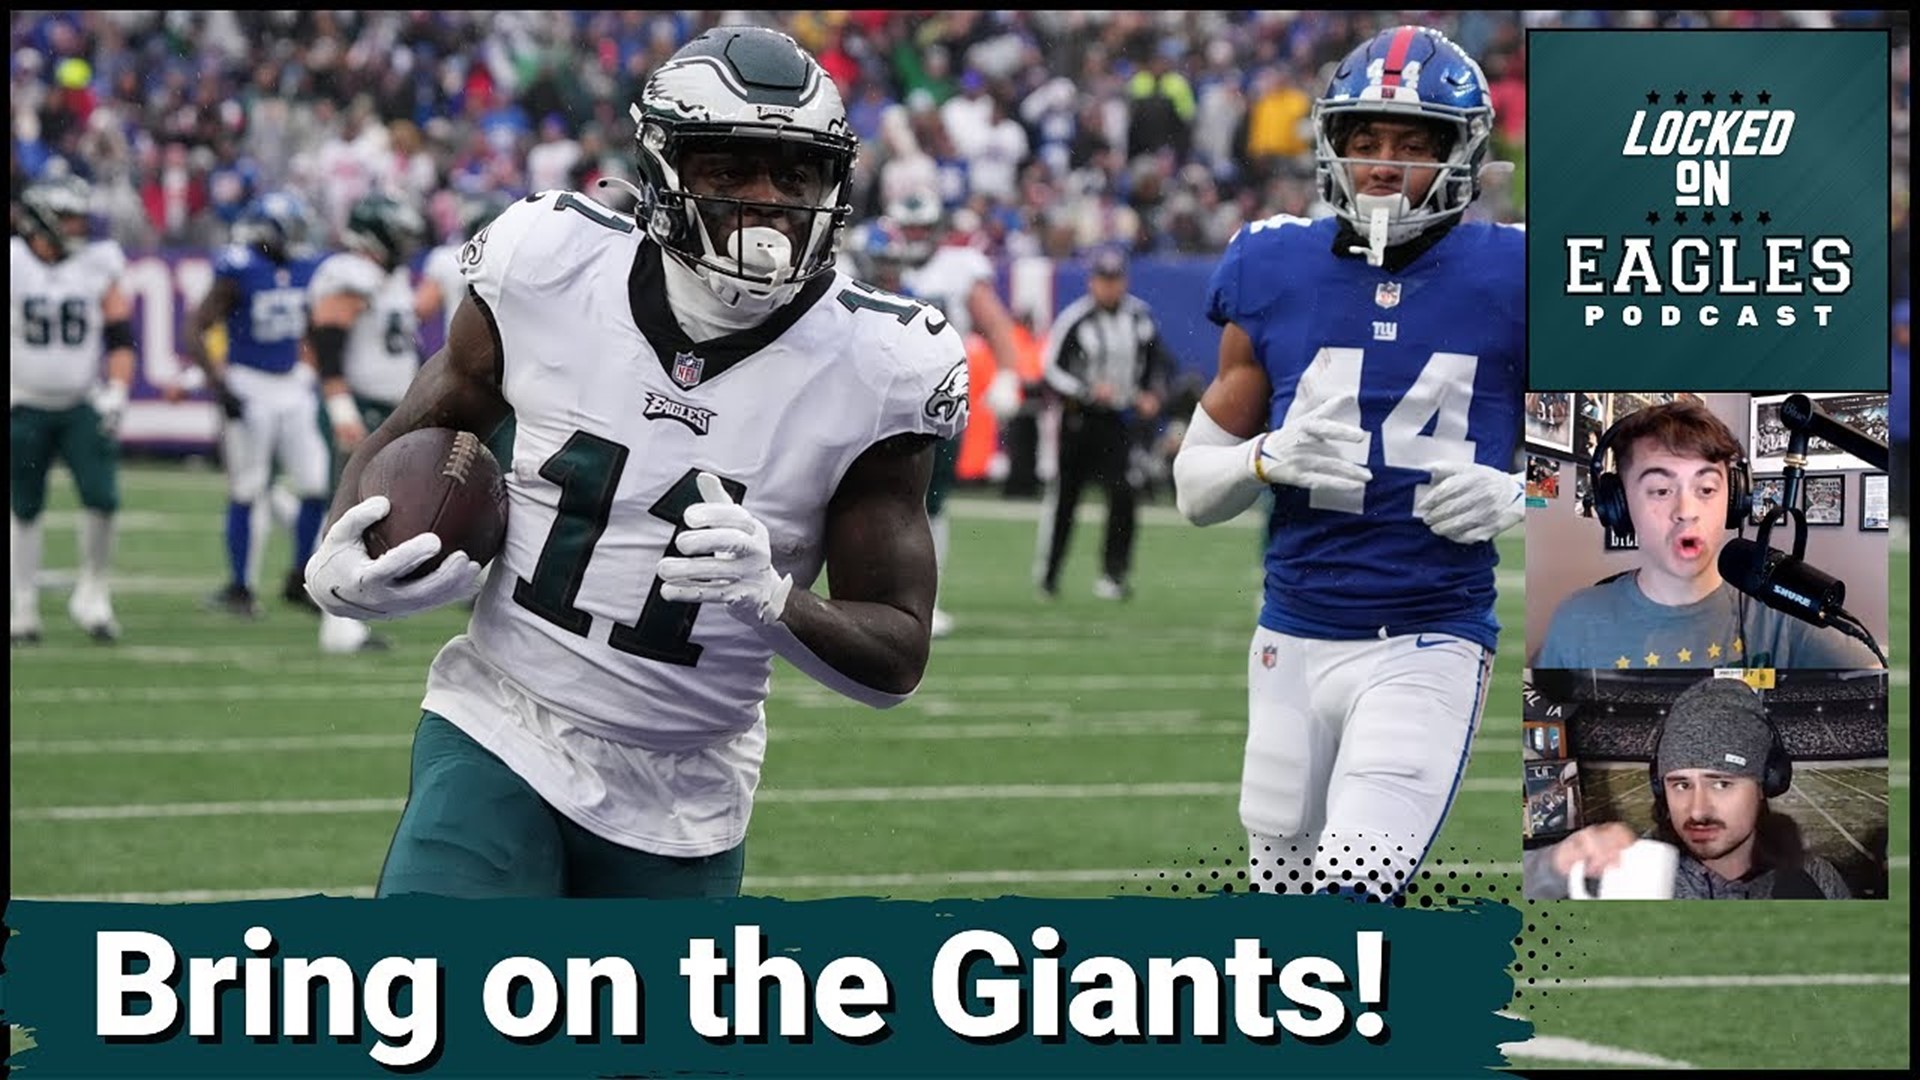 After the New York Giants upset the Minnesota Vikings in the wild card round of the NFL playoffs, it is now confirmed the Philadelphia Eagles will host New York.